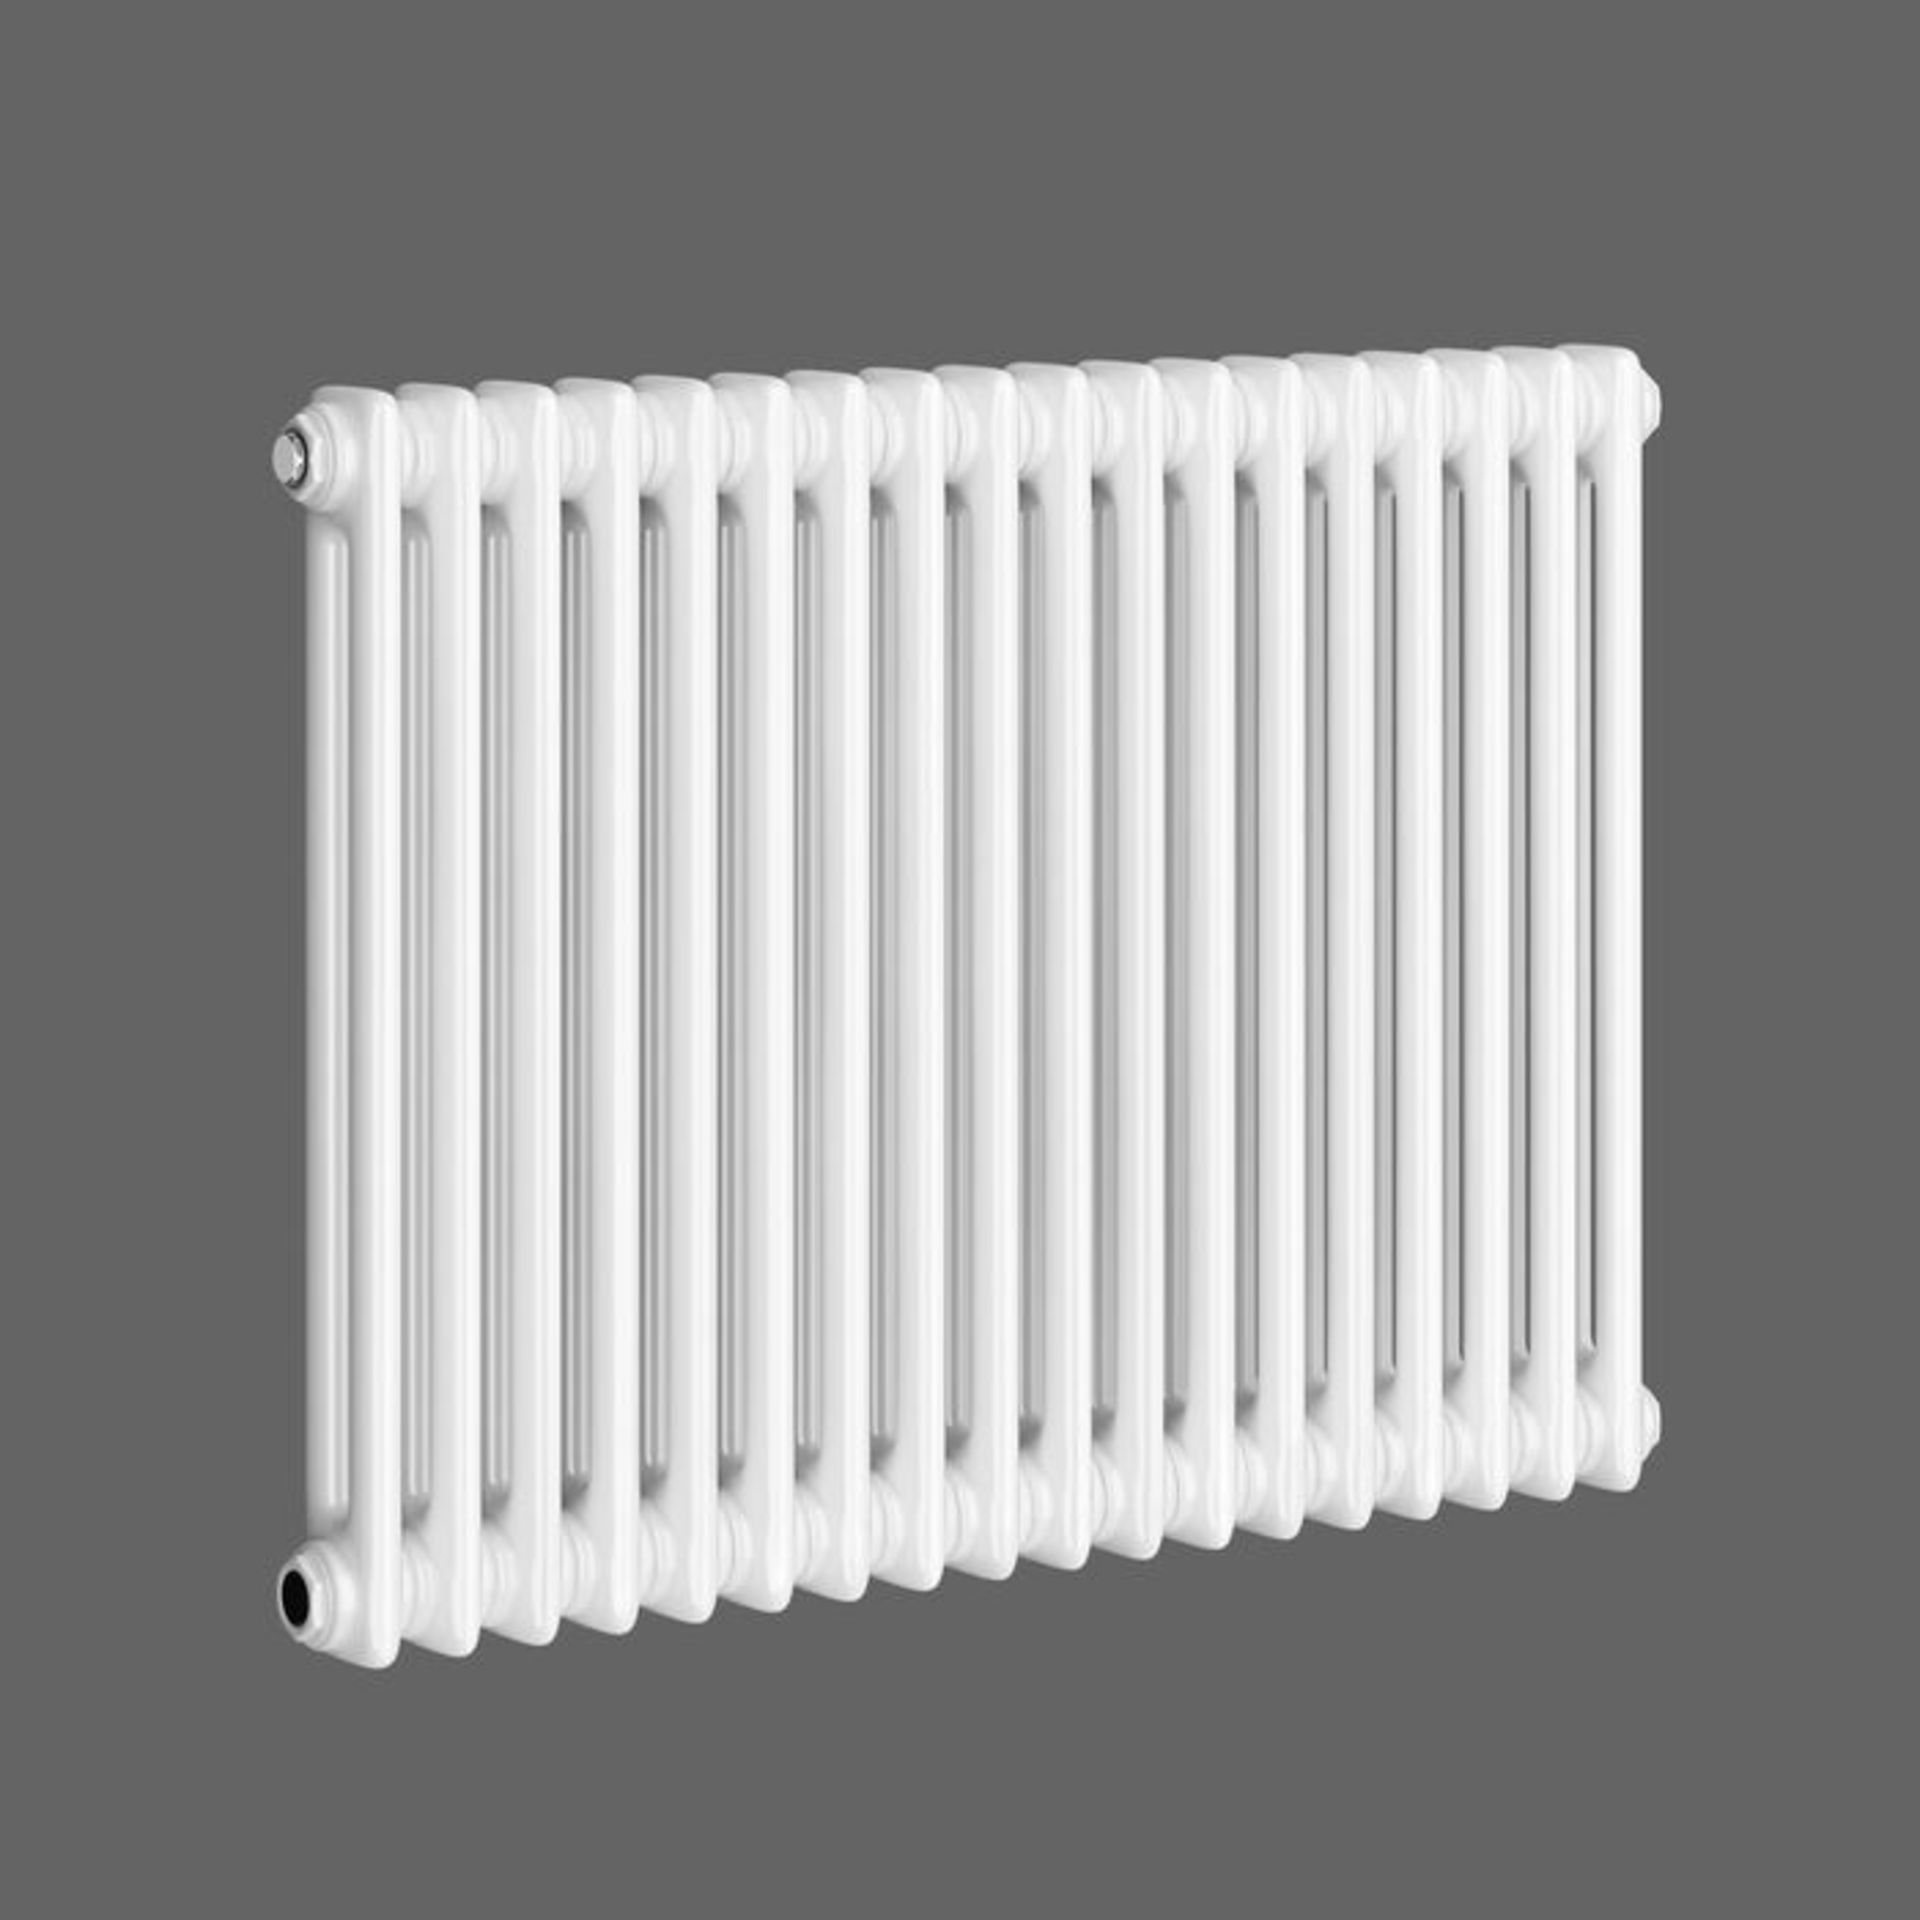 (QQ137) 500x812mm White Double Panel Horizontal Colosseum Traditional Radiator. For elegant(( - Image 4 of 4